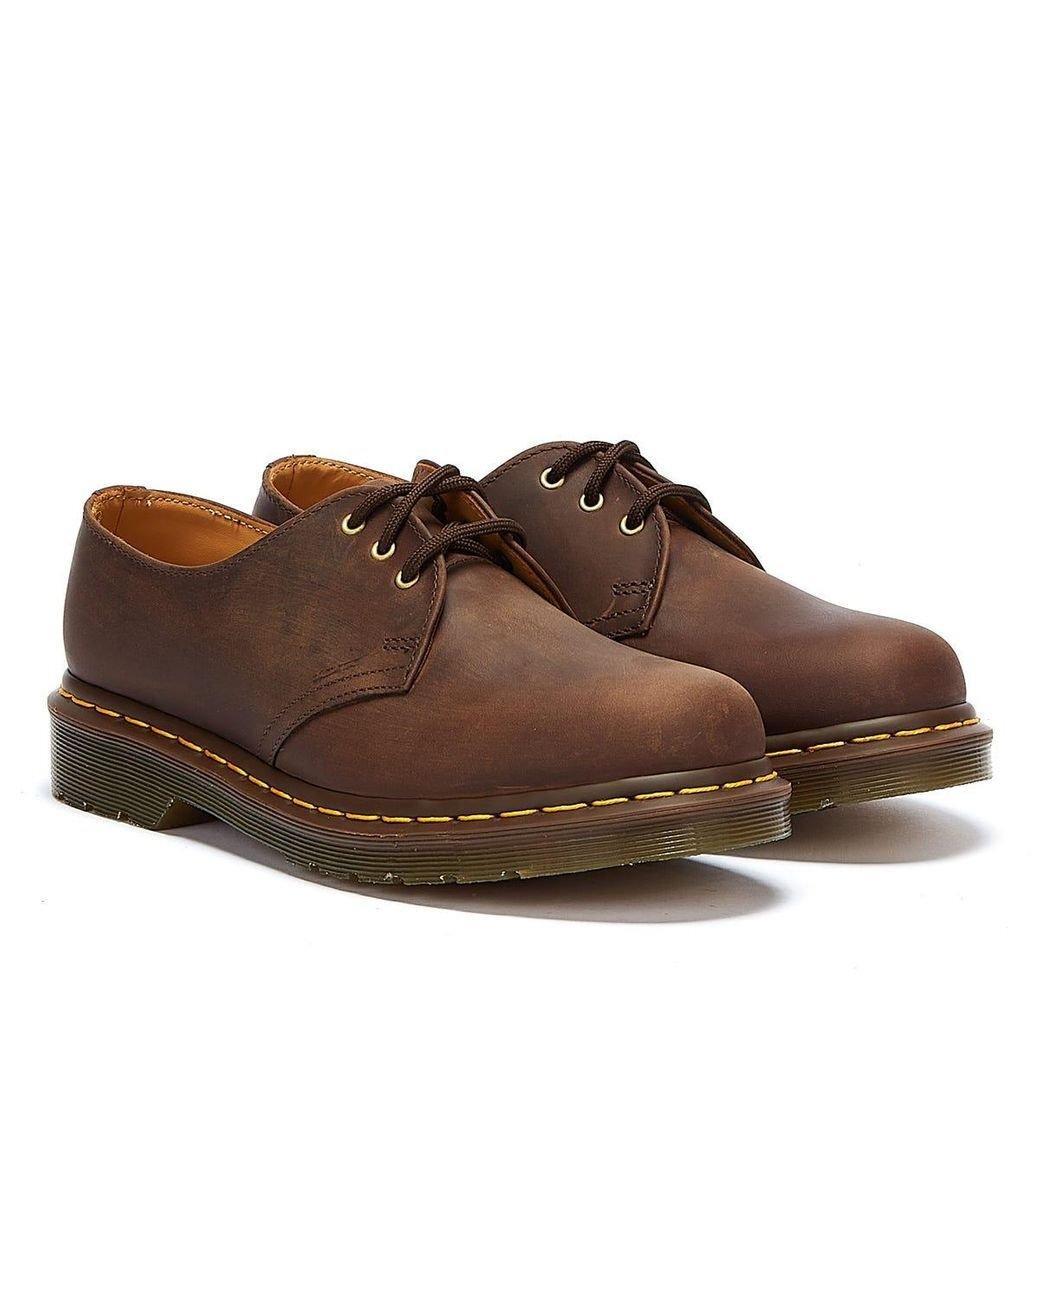 Dr. Martens 1461 Smooth Shoes Classic 3 Eye Lace Up Unisex - Dark Brown - UK 12